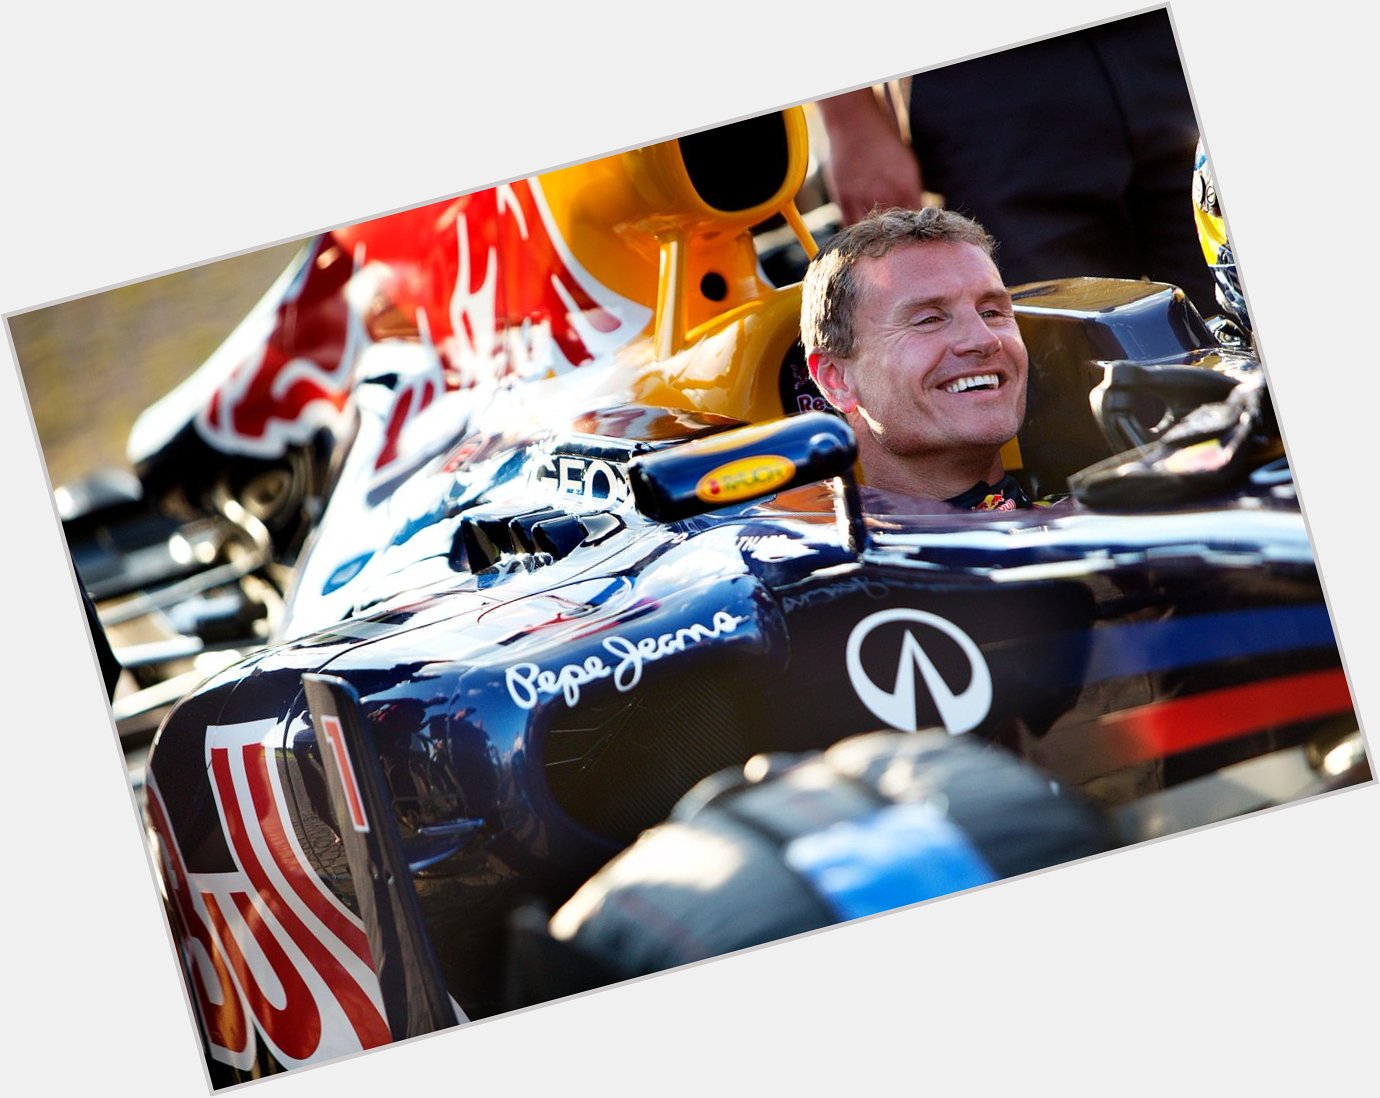  in 1971, David Coulthard was born. Happy Birthday therealdcf1! por 